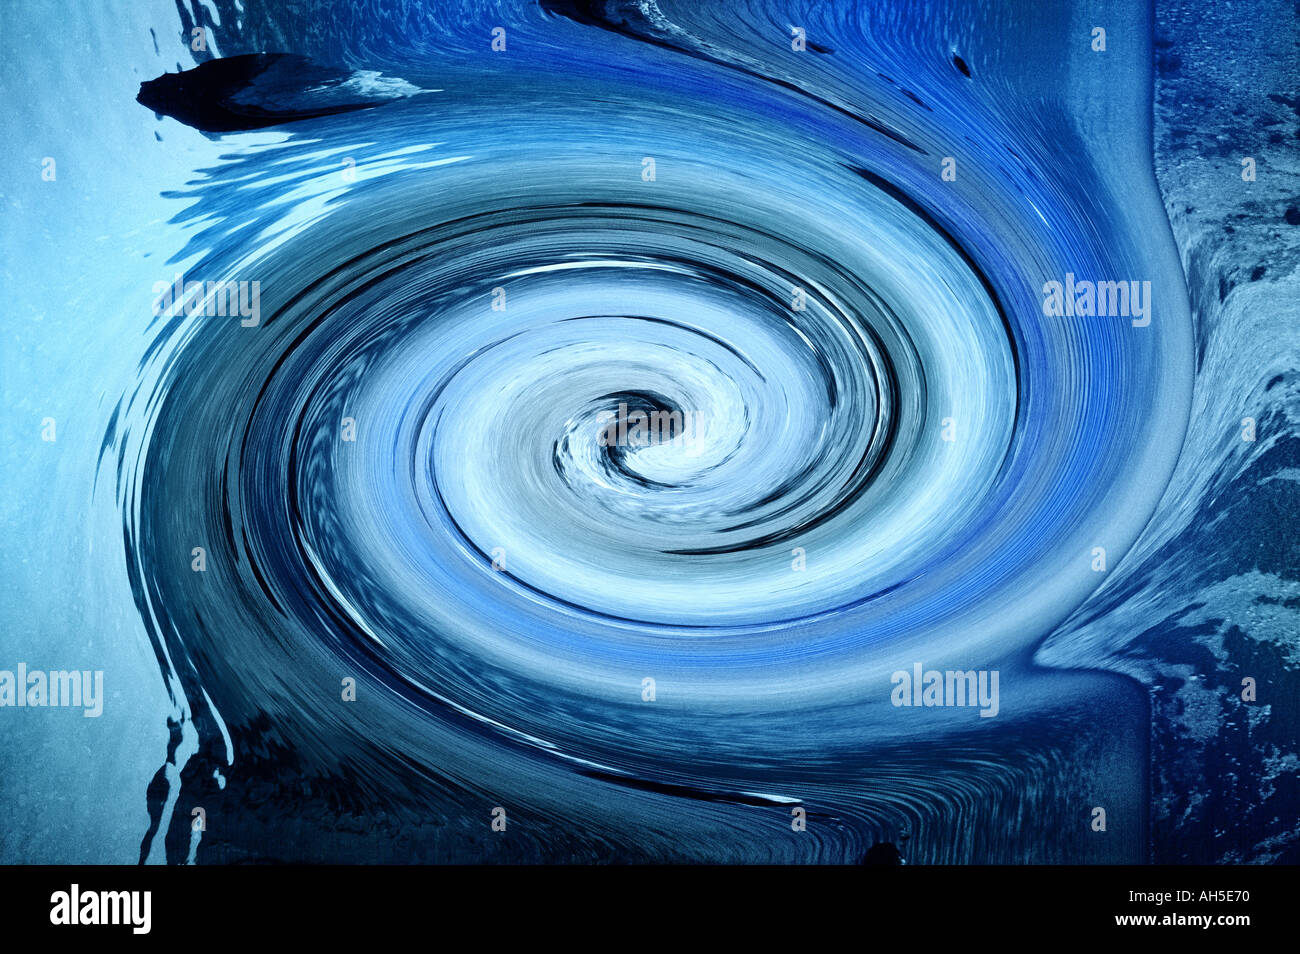 Abstract circular blue swirls in water  Stock Photo